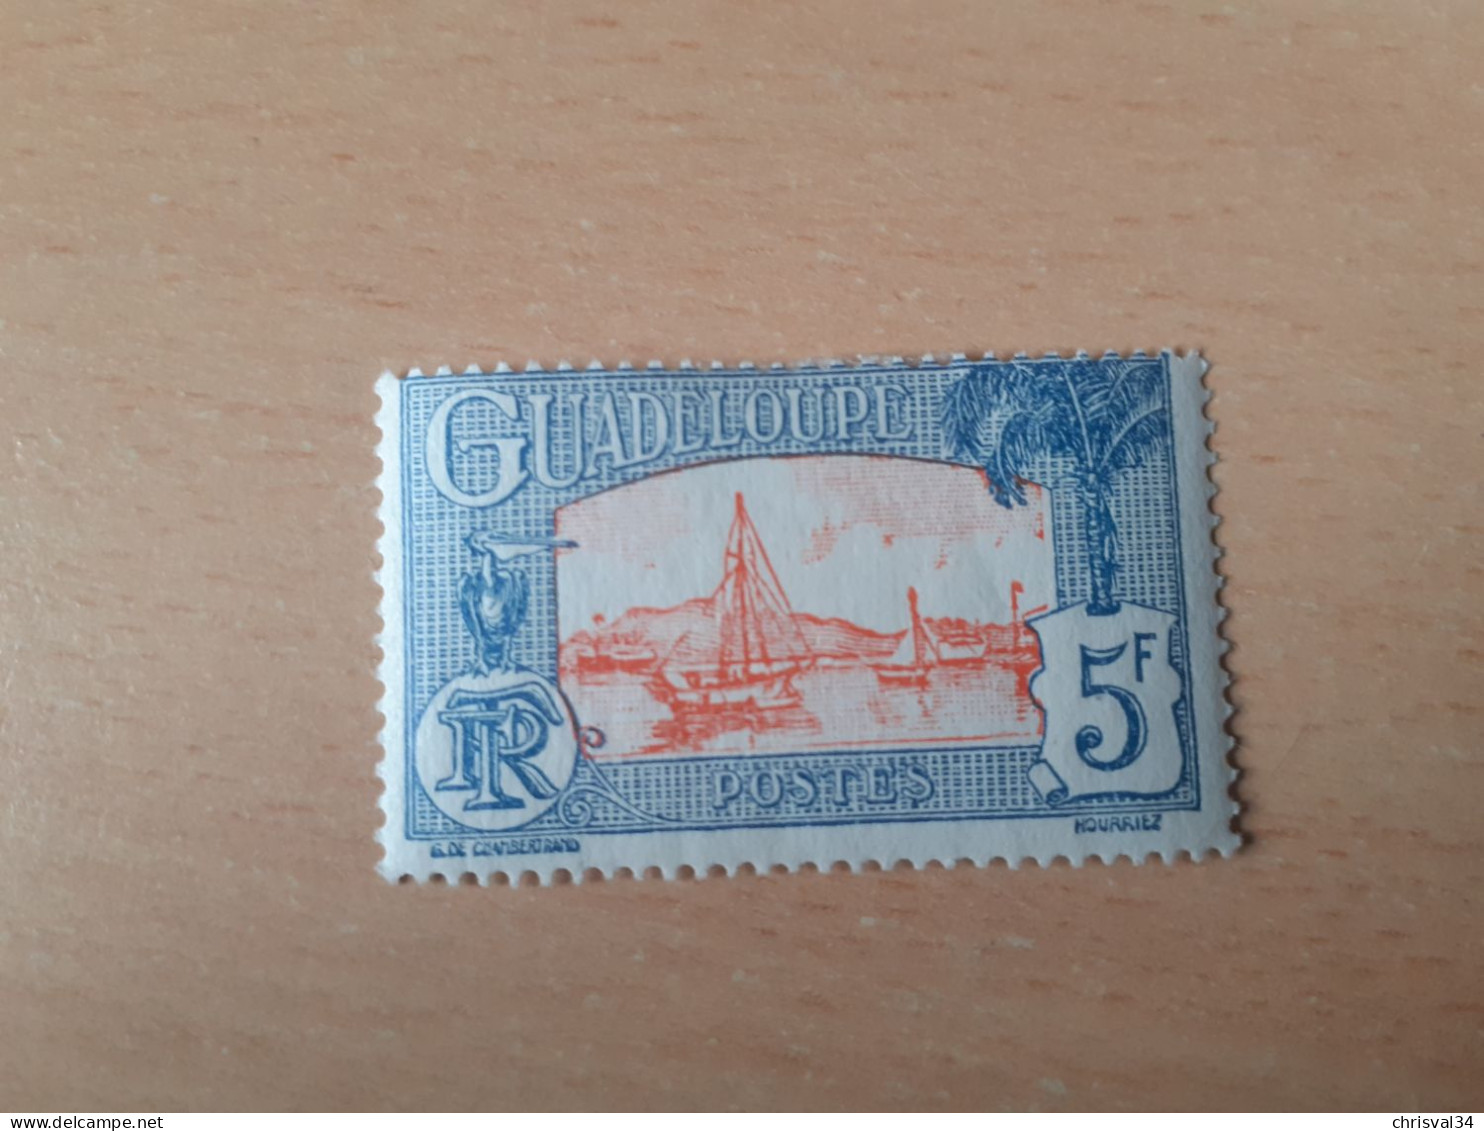 TIMBRE   GUADELOUPE       N  120    COTE  1,25   EUROS  NEUF  TRACE  CHARNIERE - Nuevos